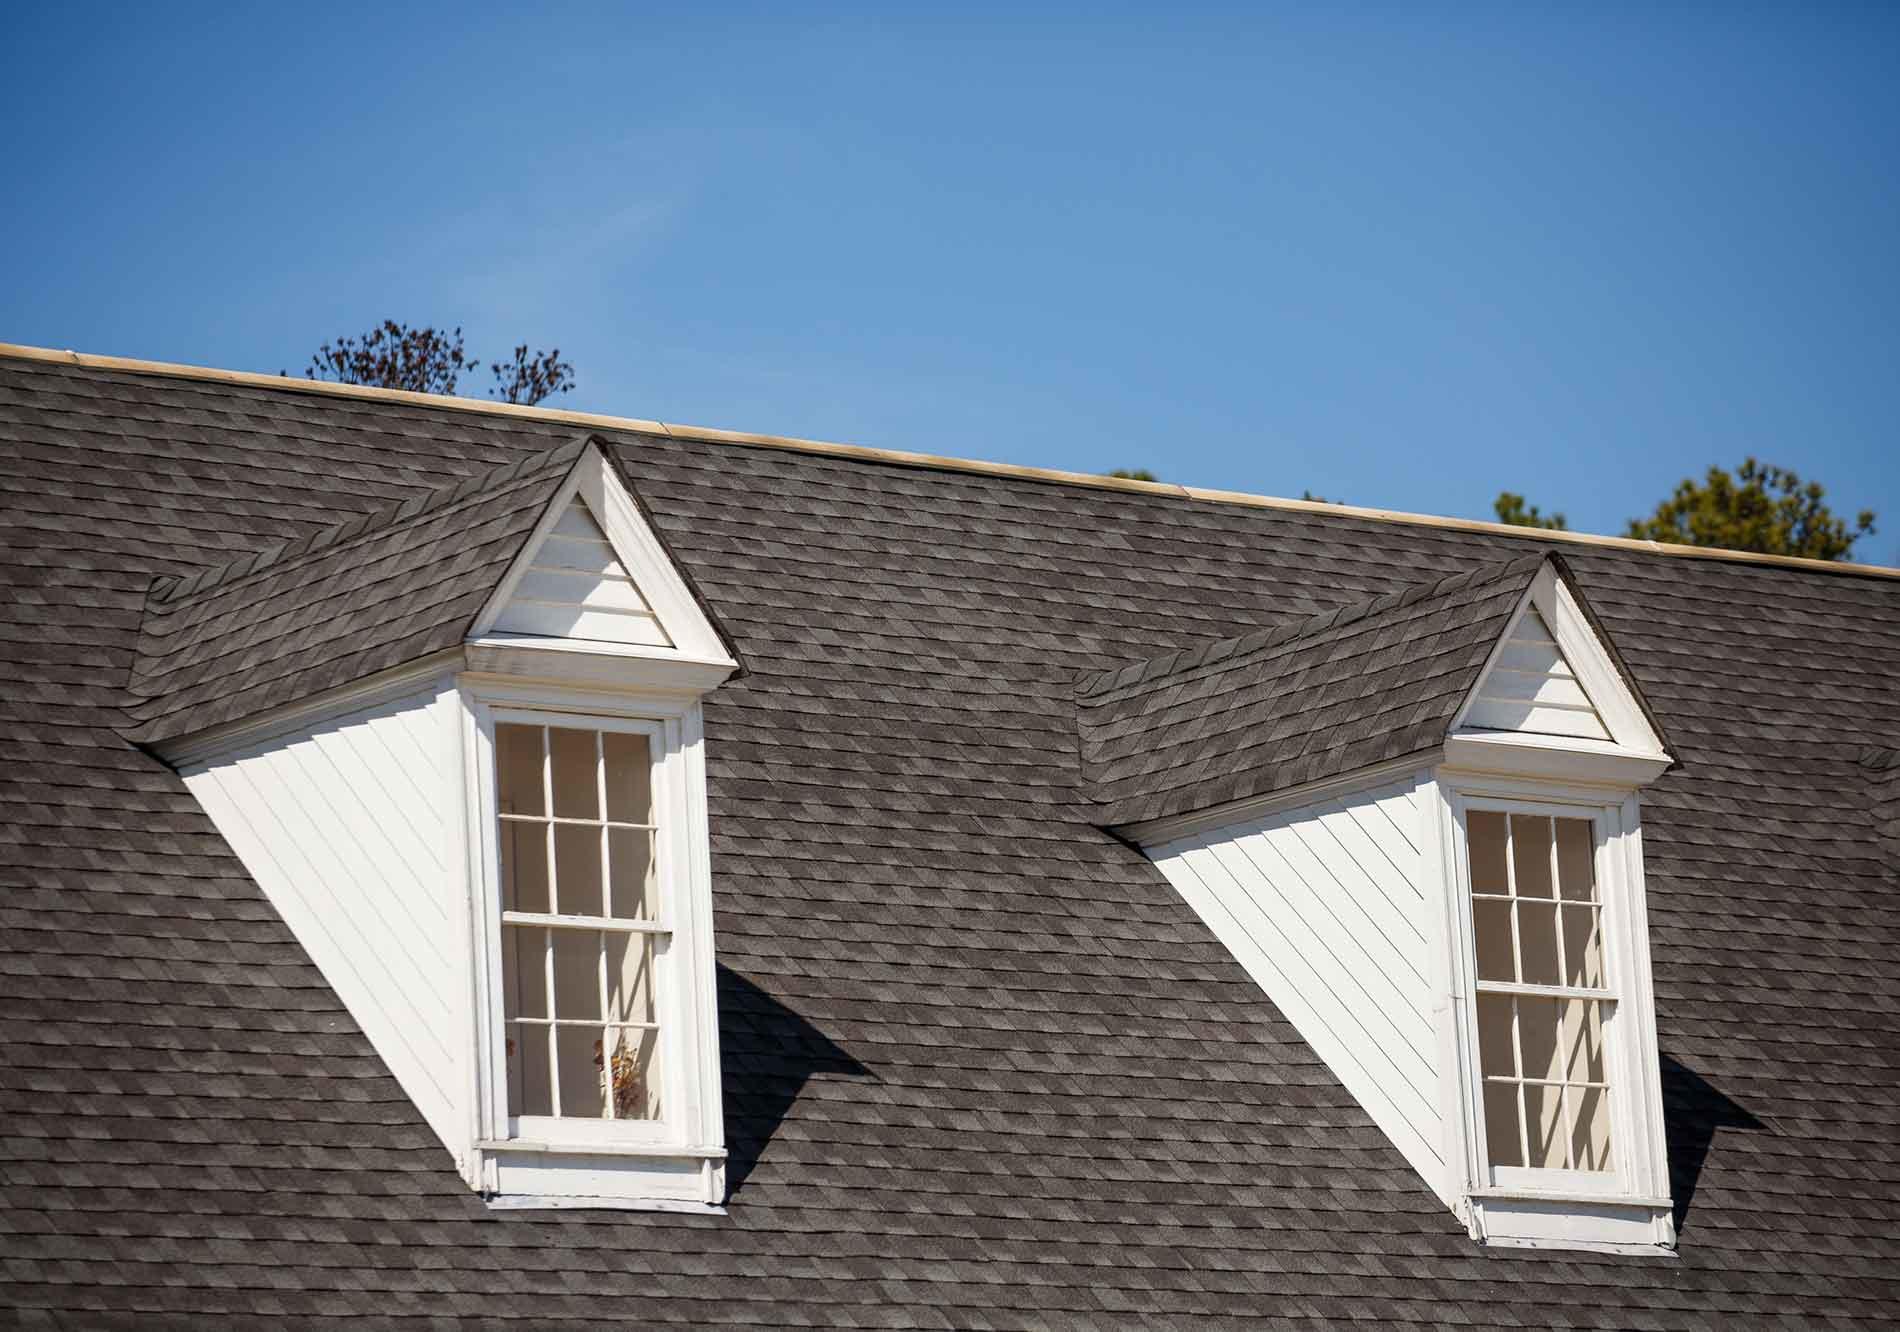 Our expert team will provide you with the best products and craftsmanship so your roofing system wil Kentuckiana Roofing Louisville (502)893-5149